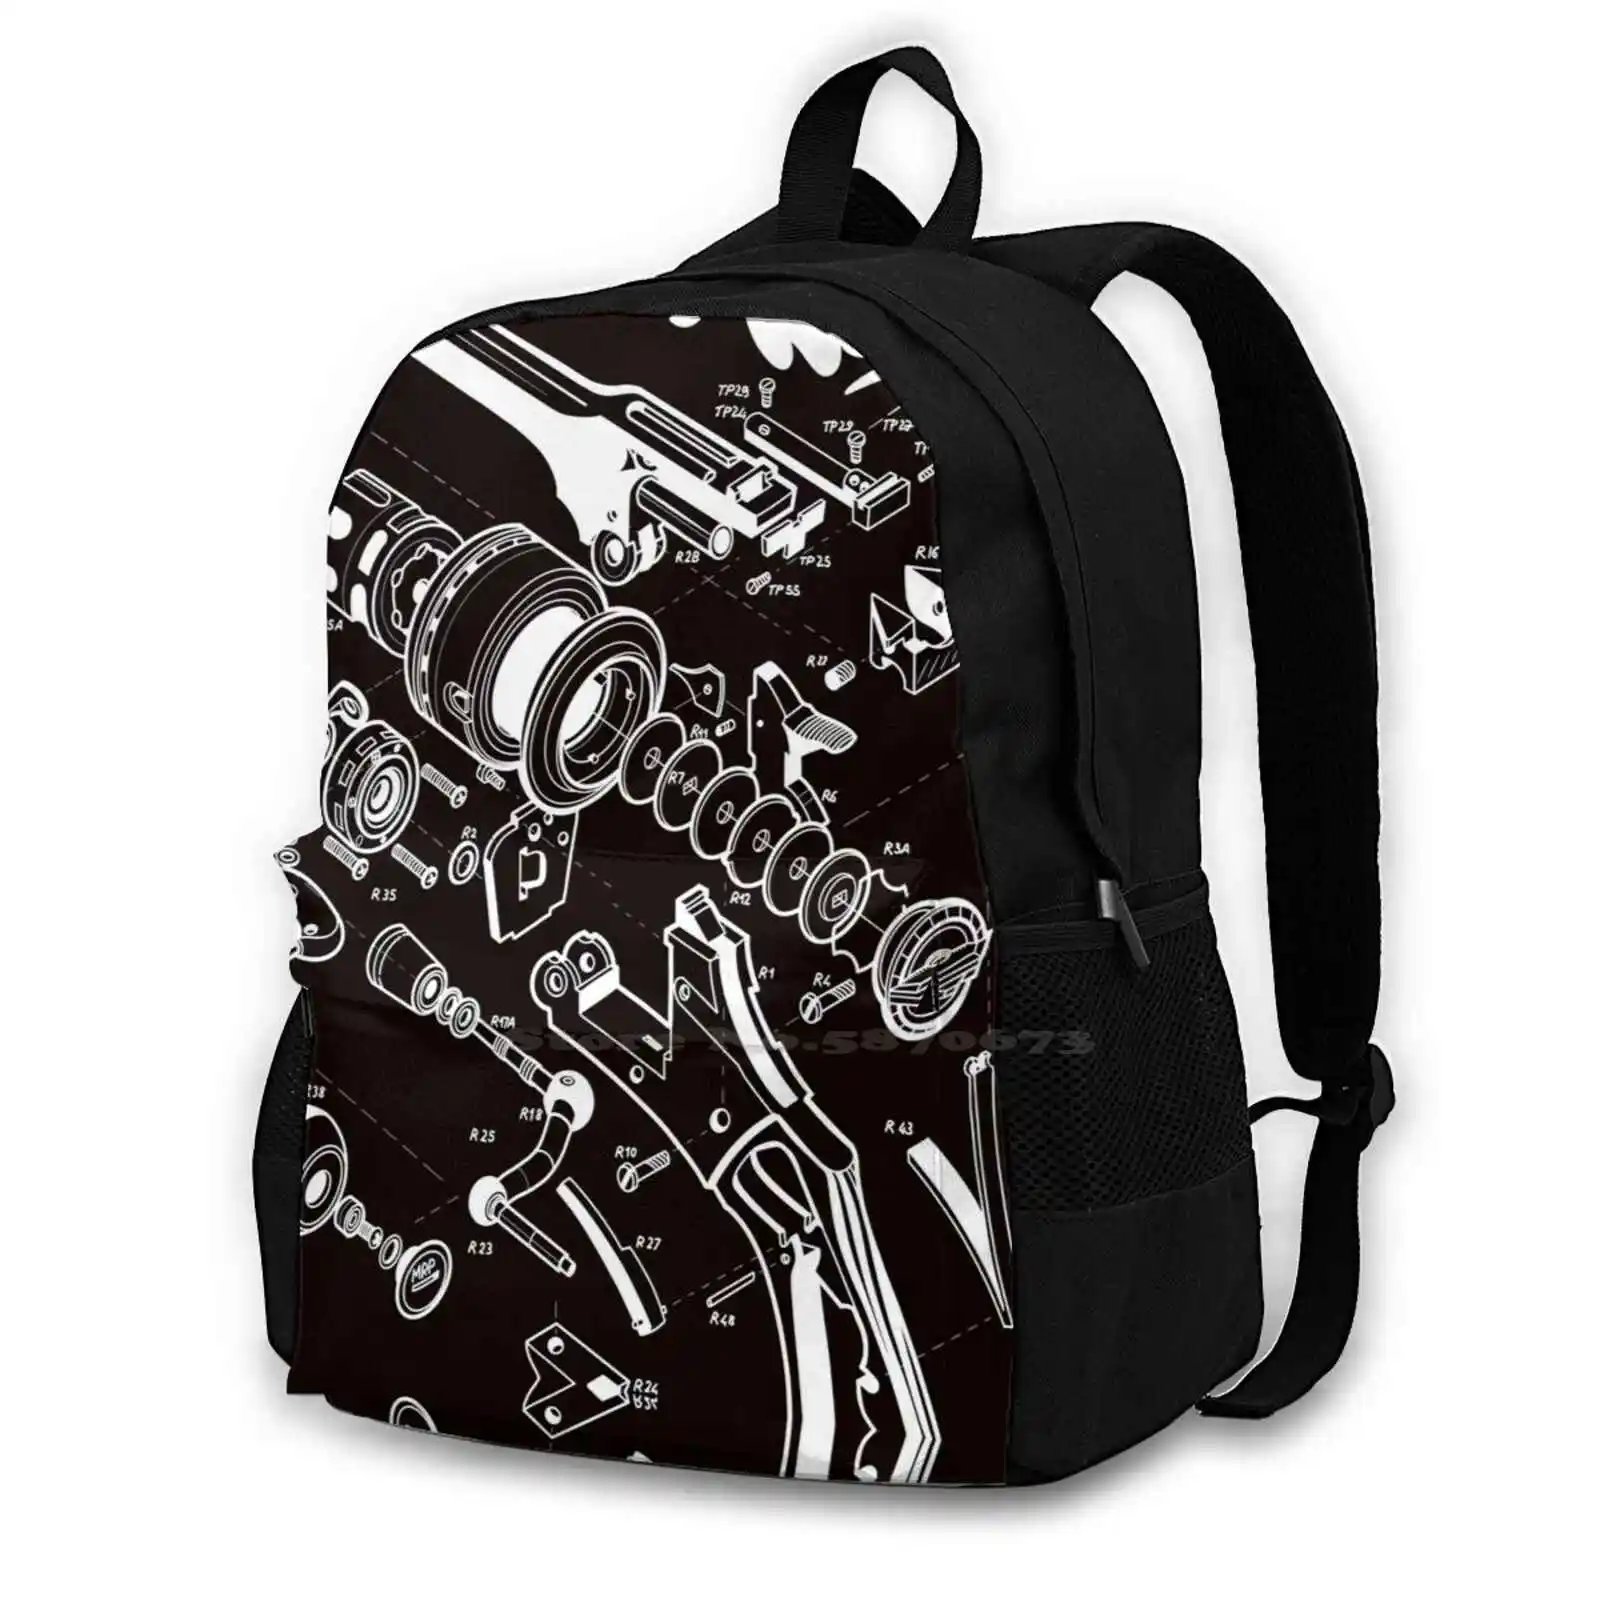 Pimp My Reel/ Negative Teen College Student Backpack Laptop Travel Bags Reel Fishing Fisherman Spinning Popping Giant Trevally